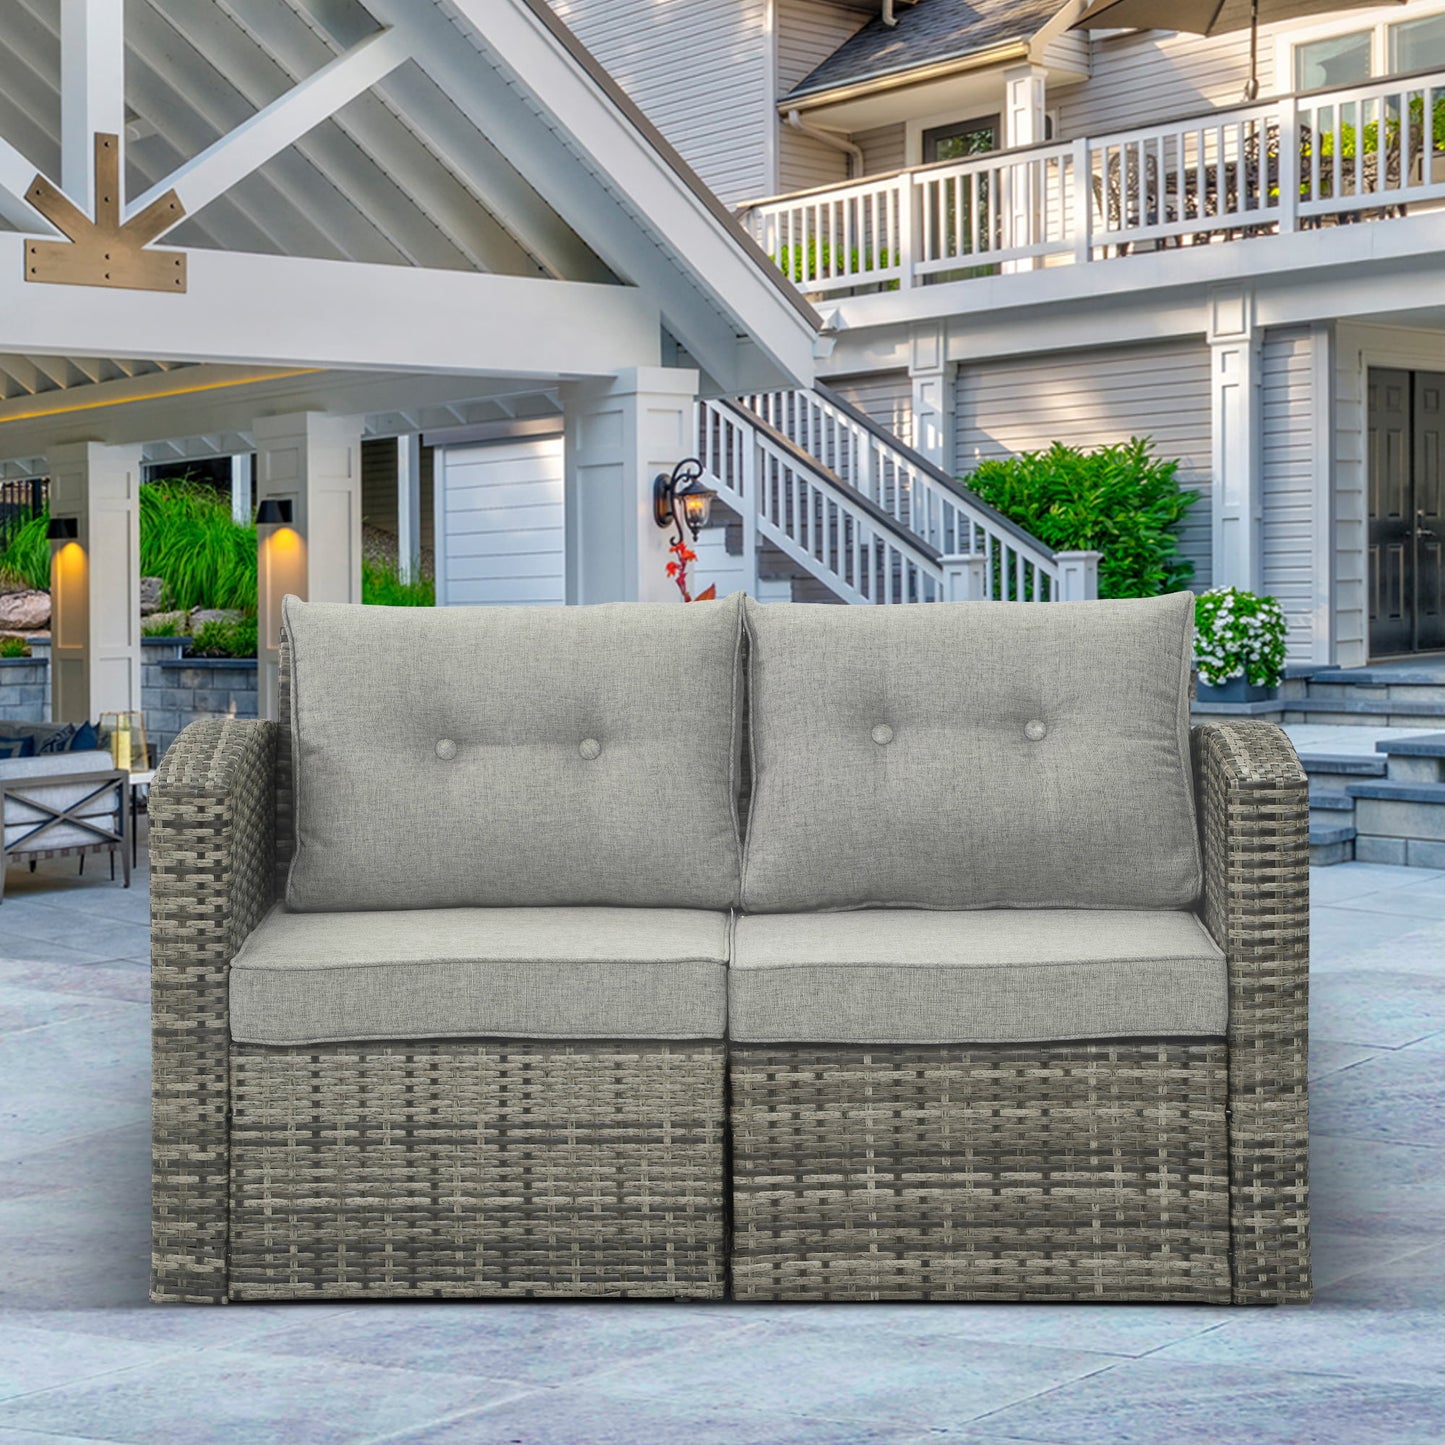 Outdoor Loveseat Patio Furniture Corner Sofa, All-Weather Brown Wicker 2-Piece Rattan Outdoor Sectional Couch Sofa Set with Non-slip Cushions,Aluminum Frame